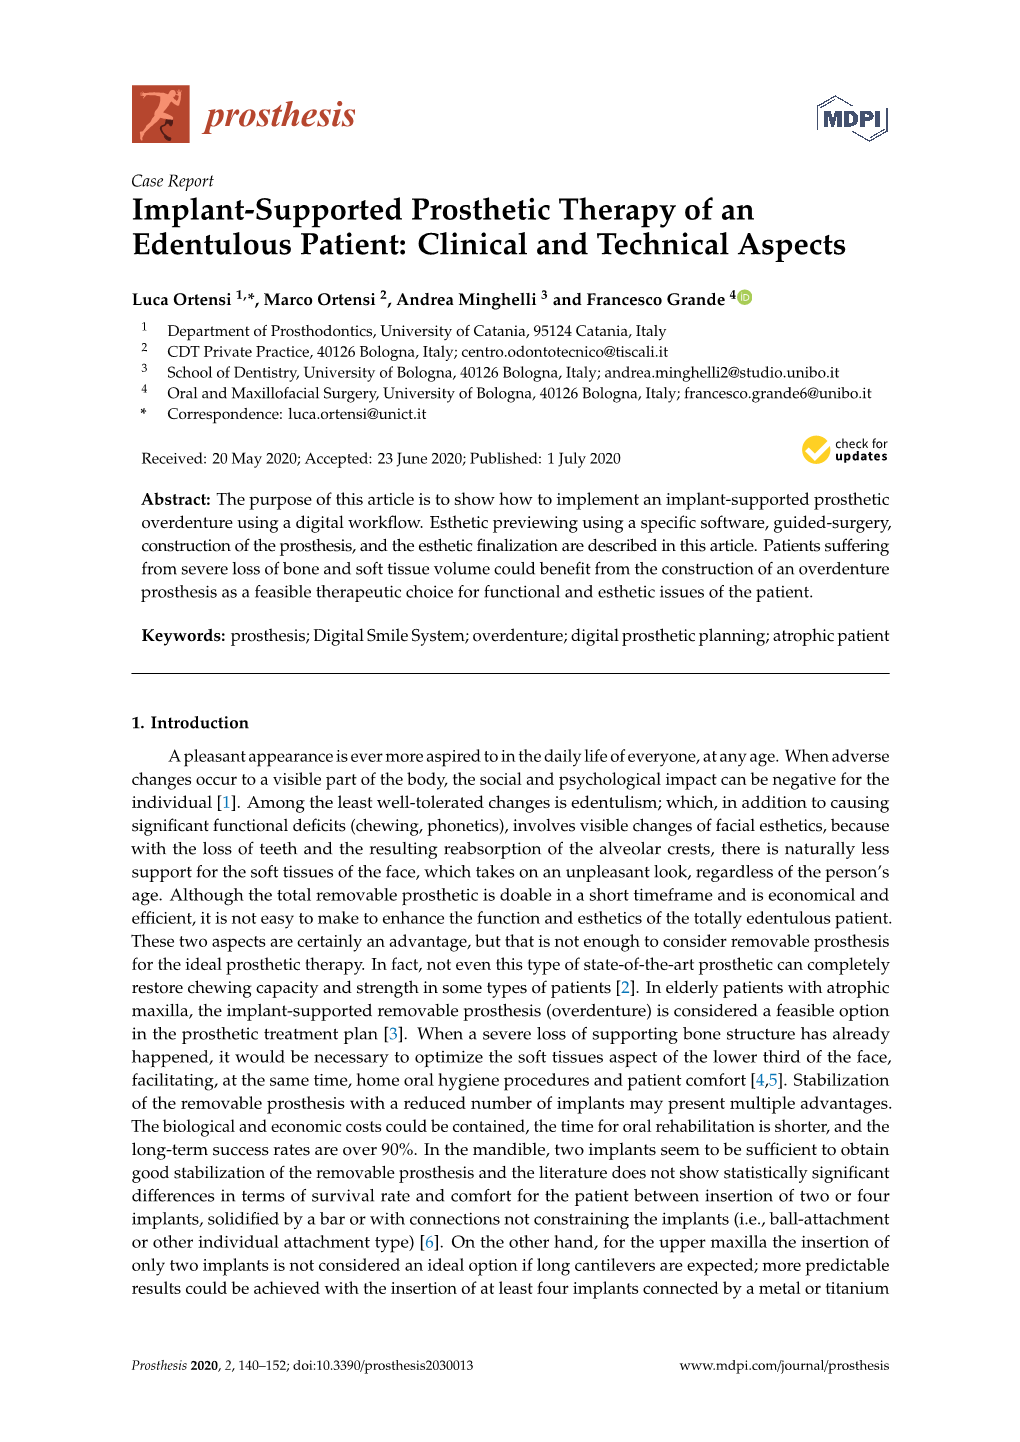 Implant-Supported Prosthetic Therapy of an Edentulous Patient: Clinical and Technical Aspects